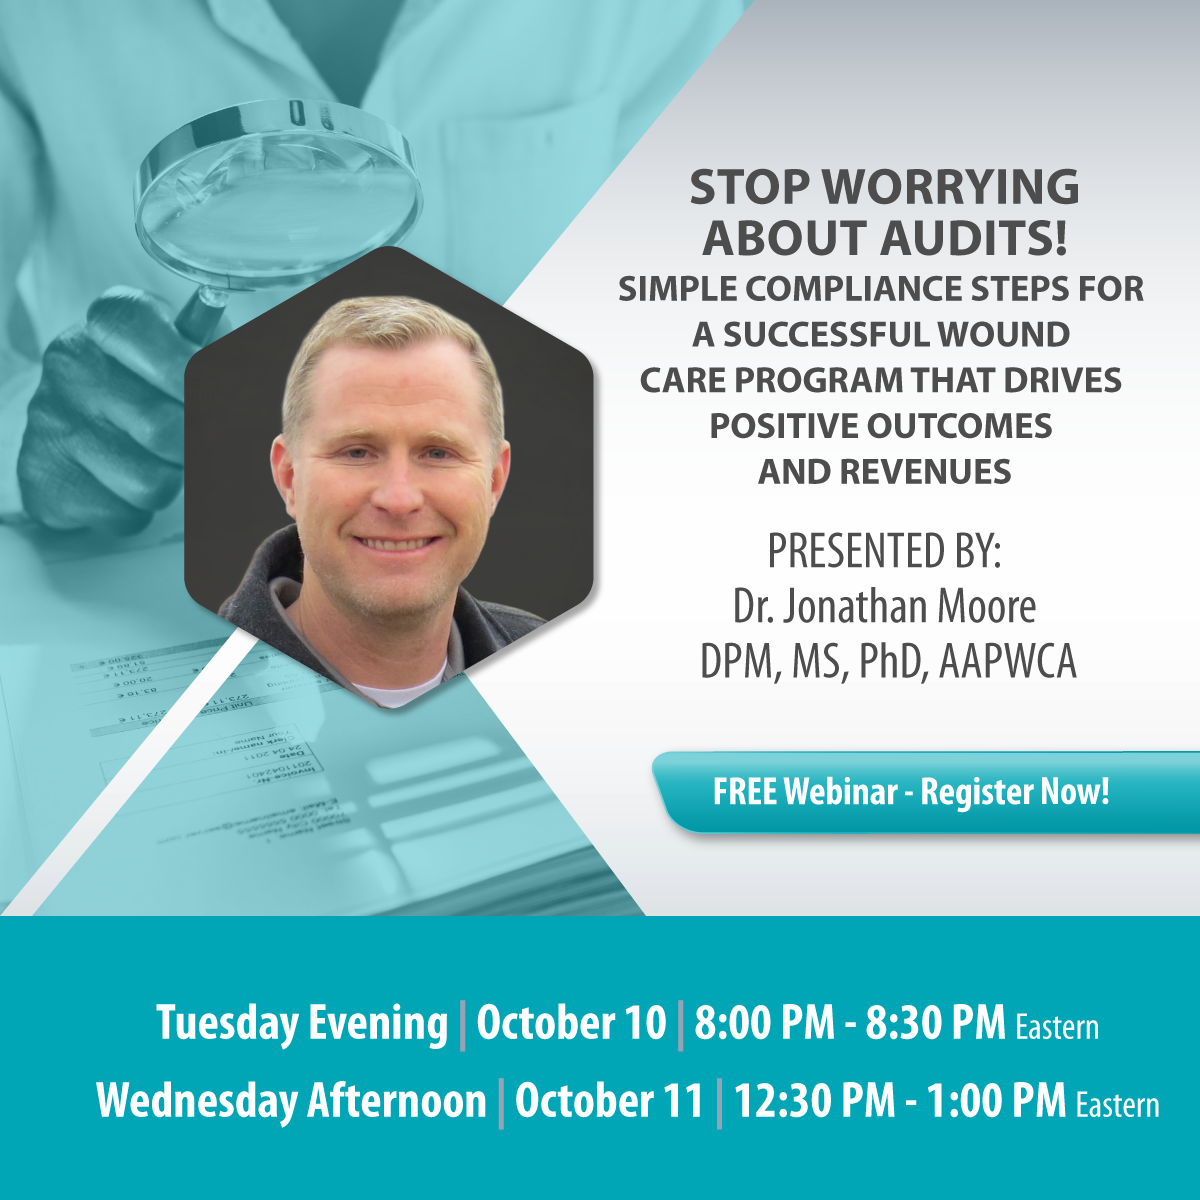 Webinar - Stop Worrying About Audits! Simple Compliance Steps For A Successful Wound Care Program That Drives Positive Outcomes And Revenues